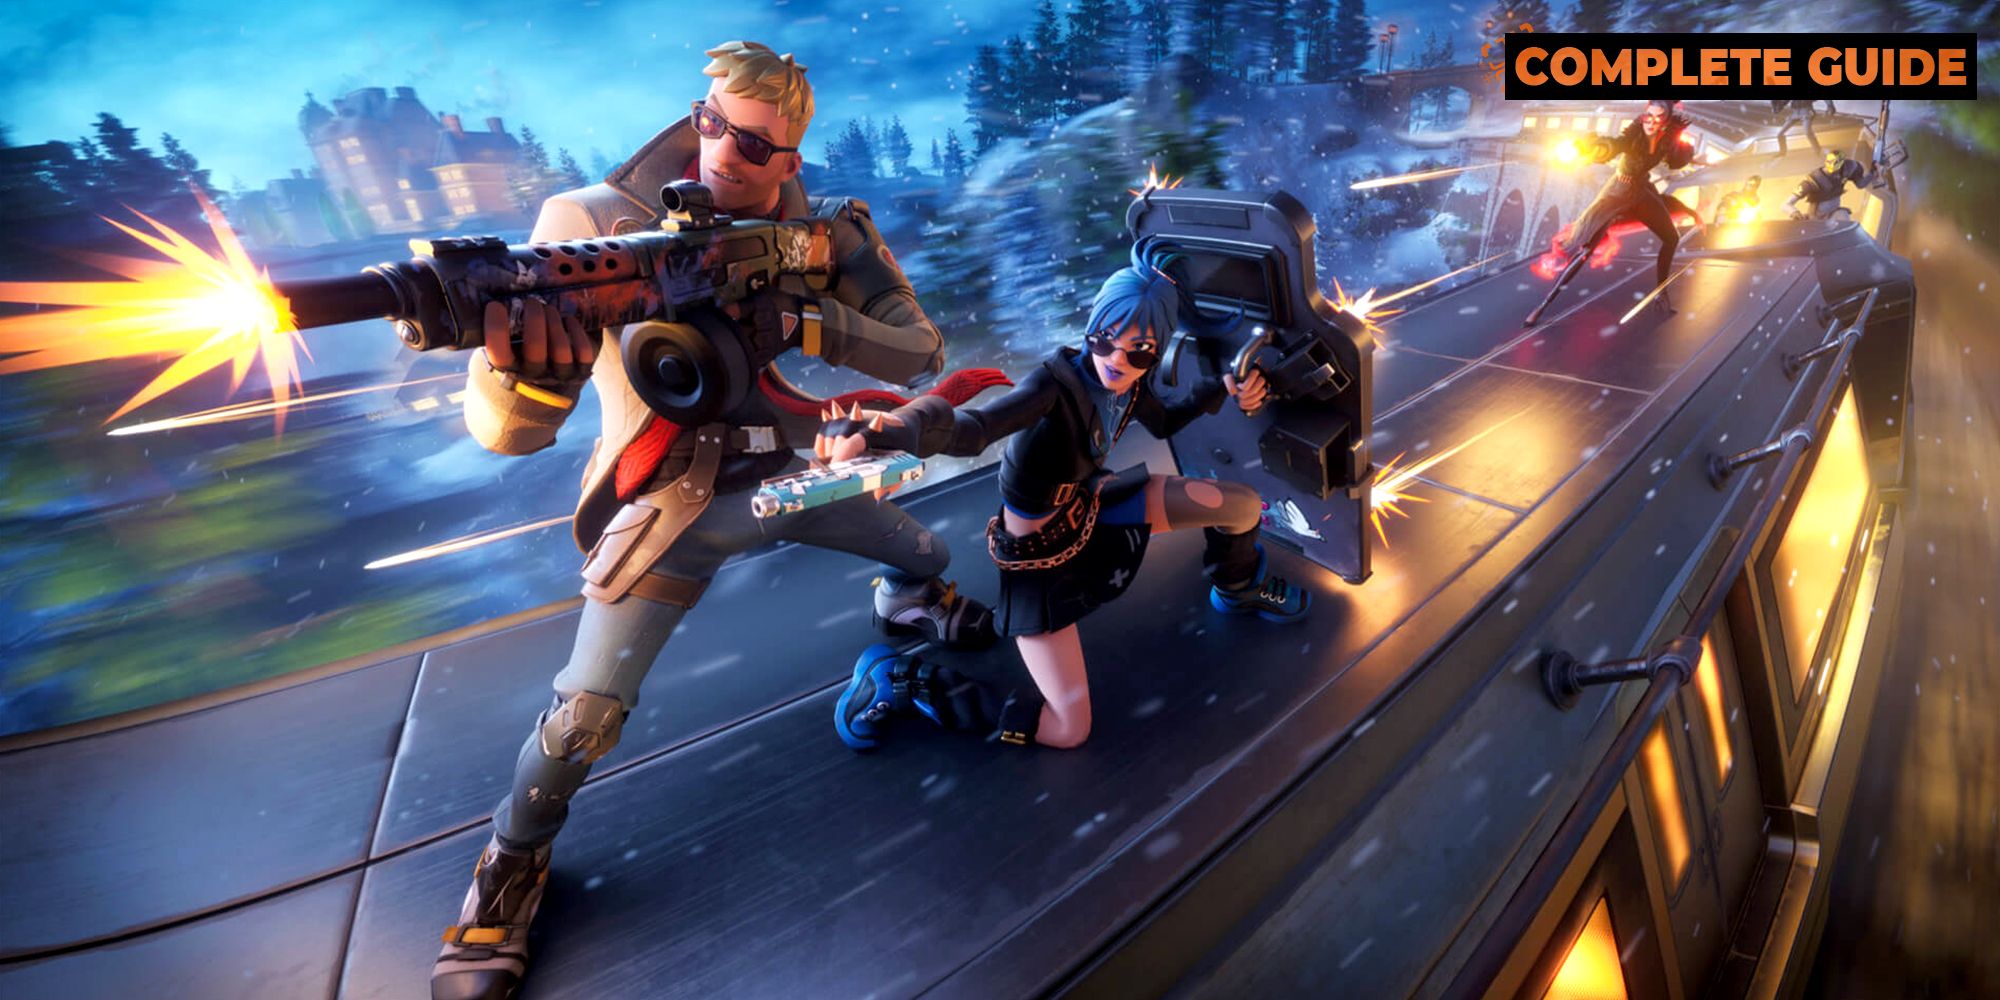 Fortnite Chapter 5, Season 1 key artwork that shows Jonesy and other characters firing weapons while aboard the train.